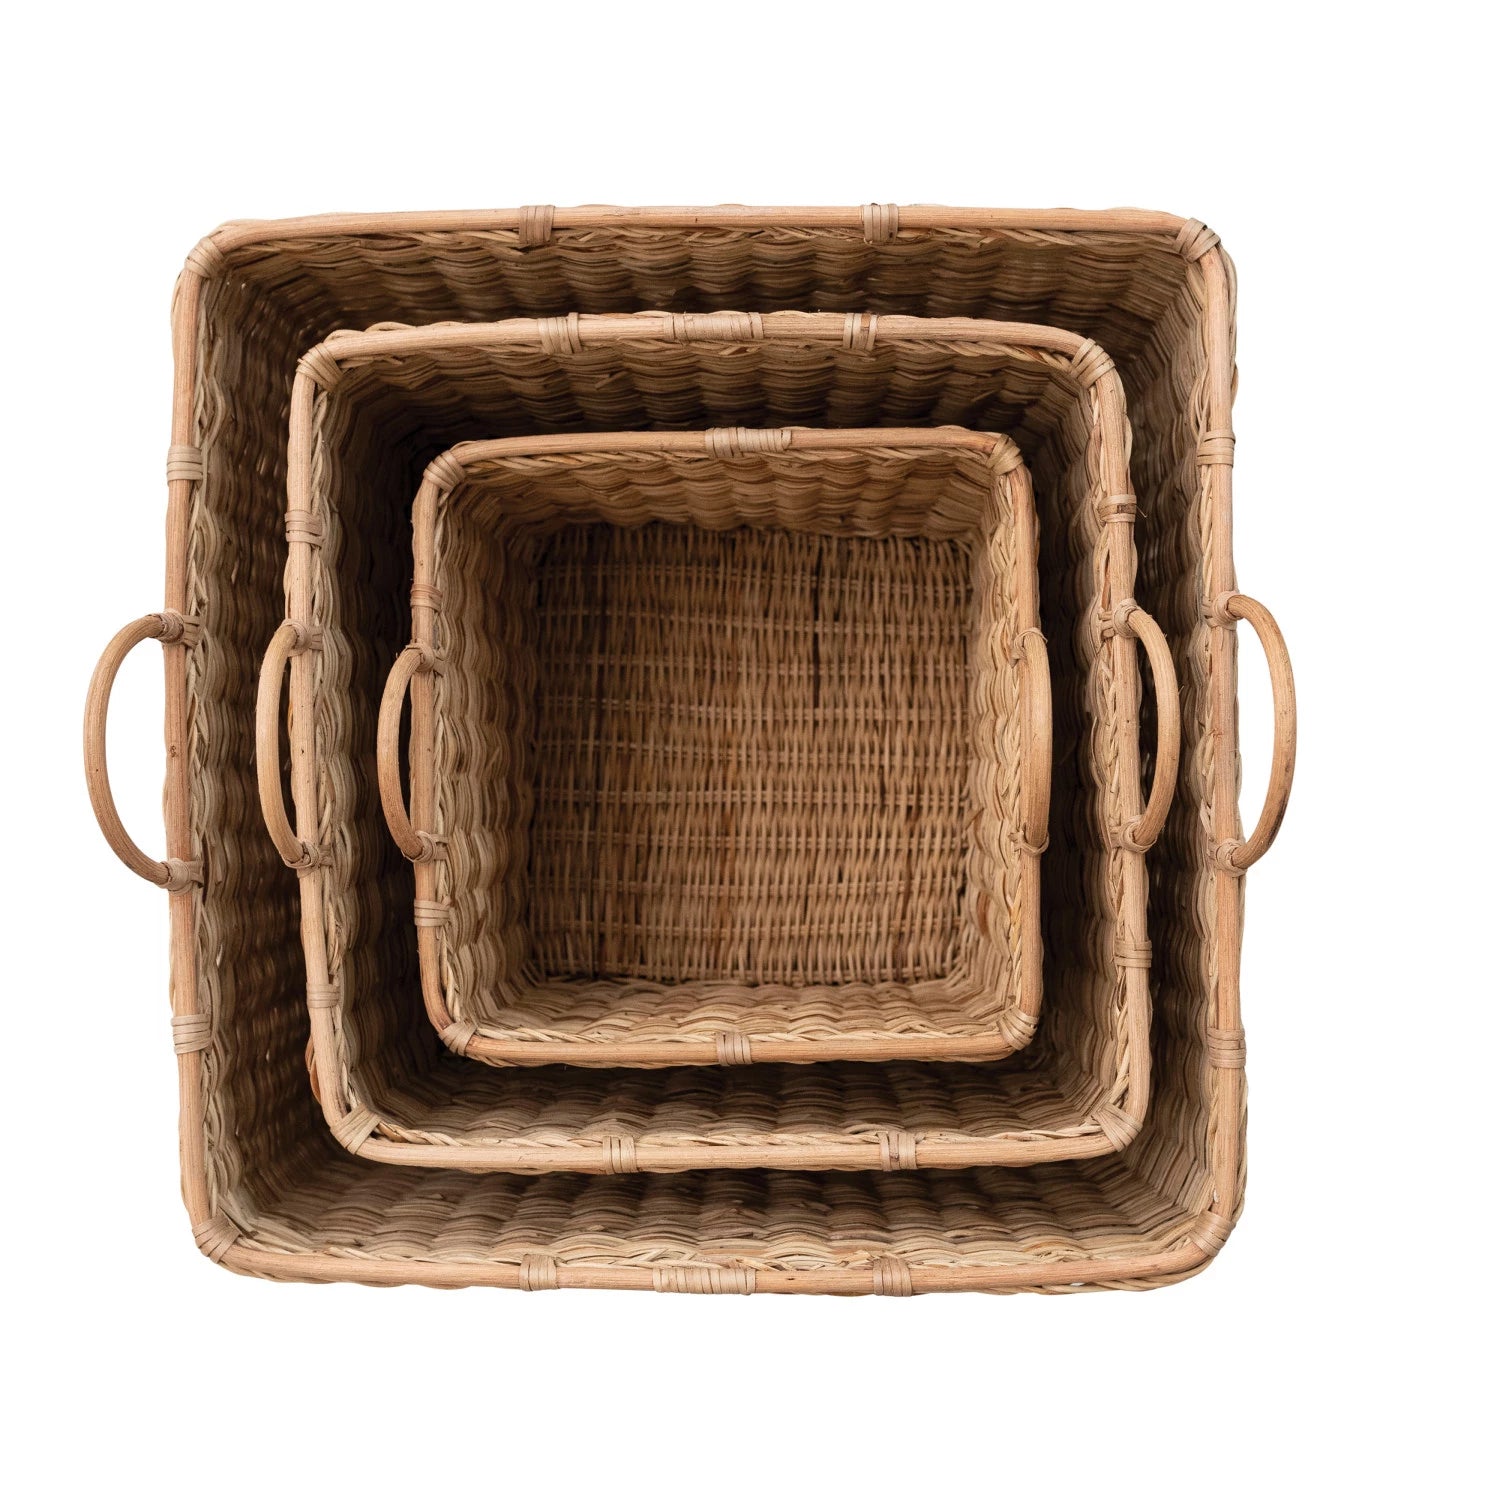 Rattan Baskets w/ Handles, The Feathered Farmhouse